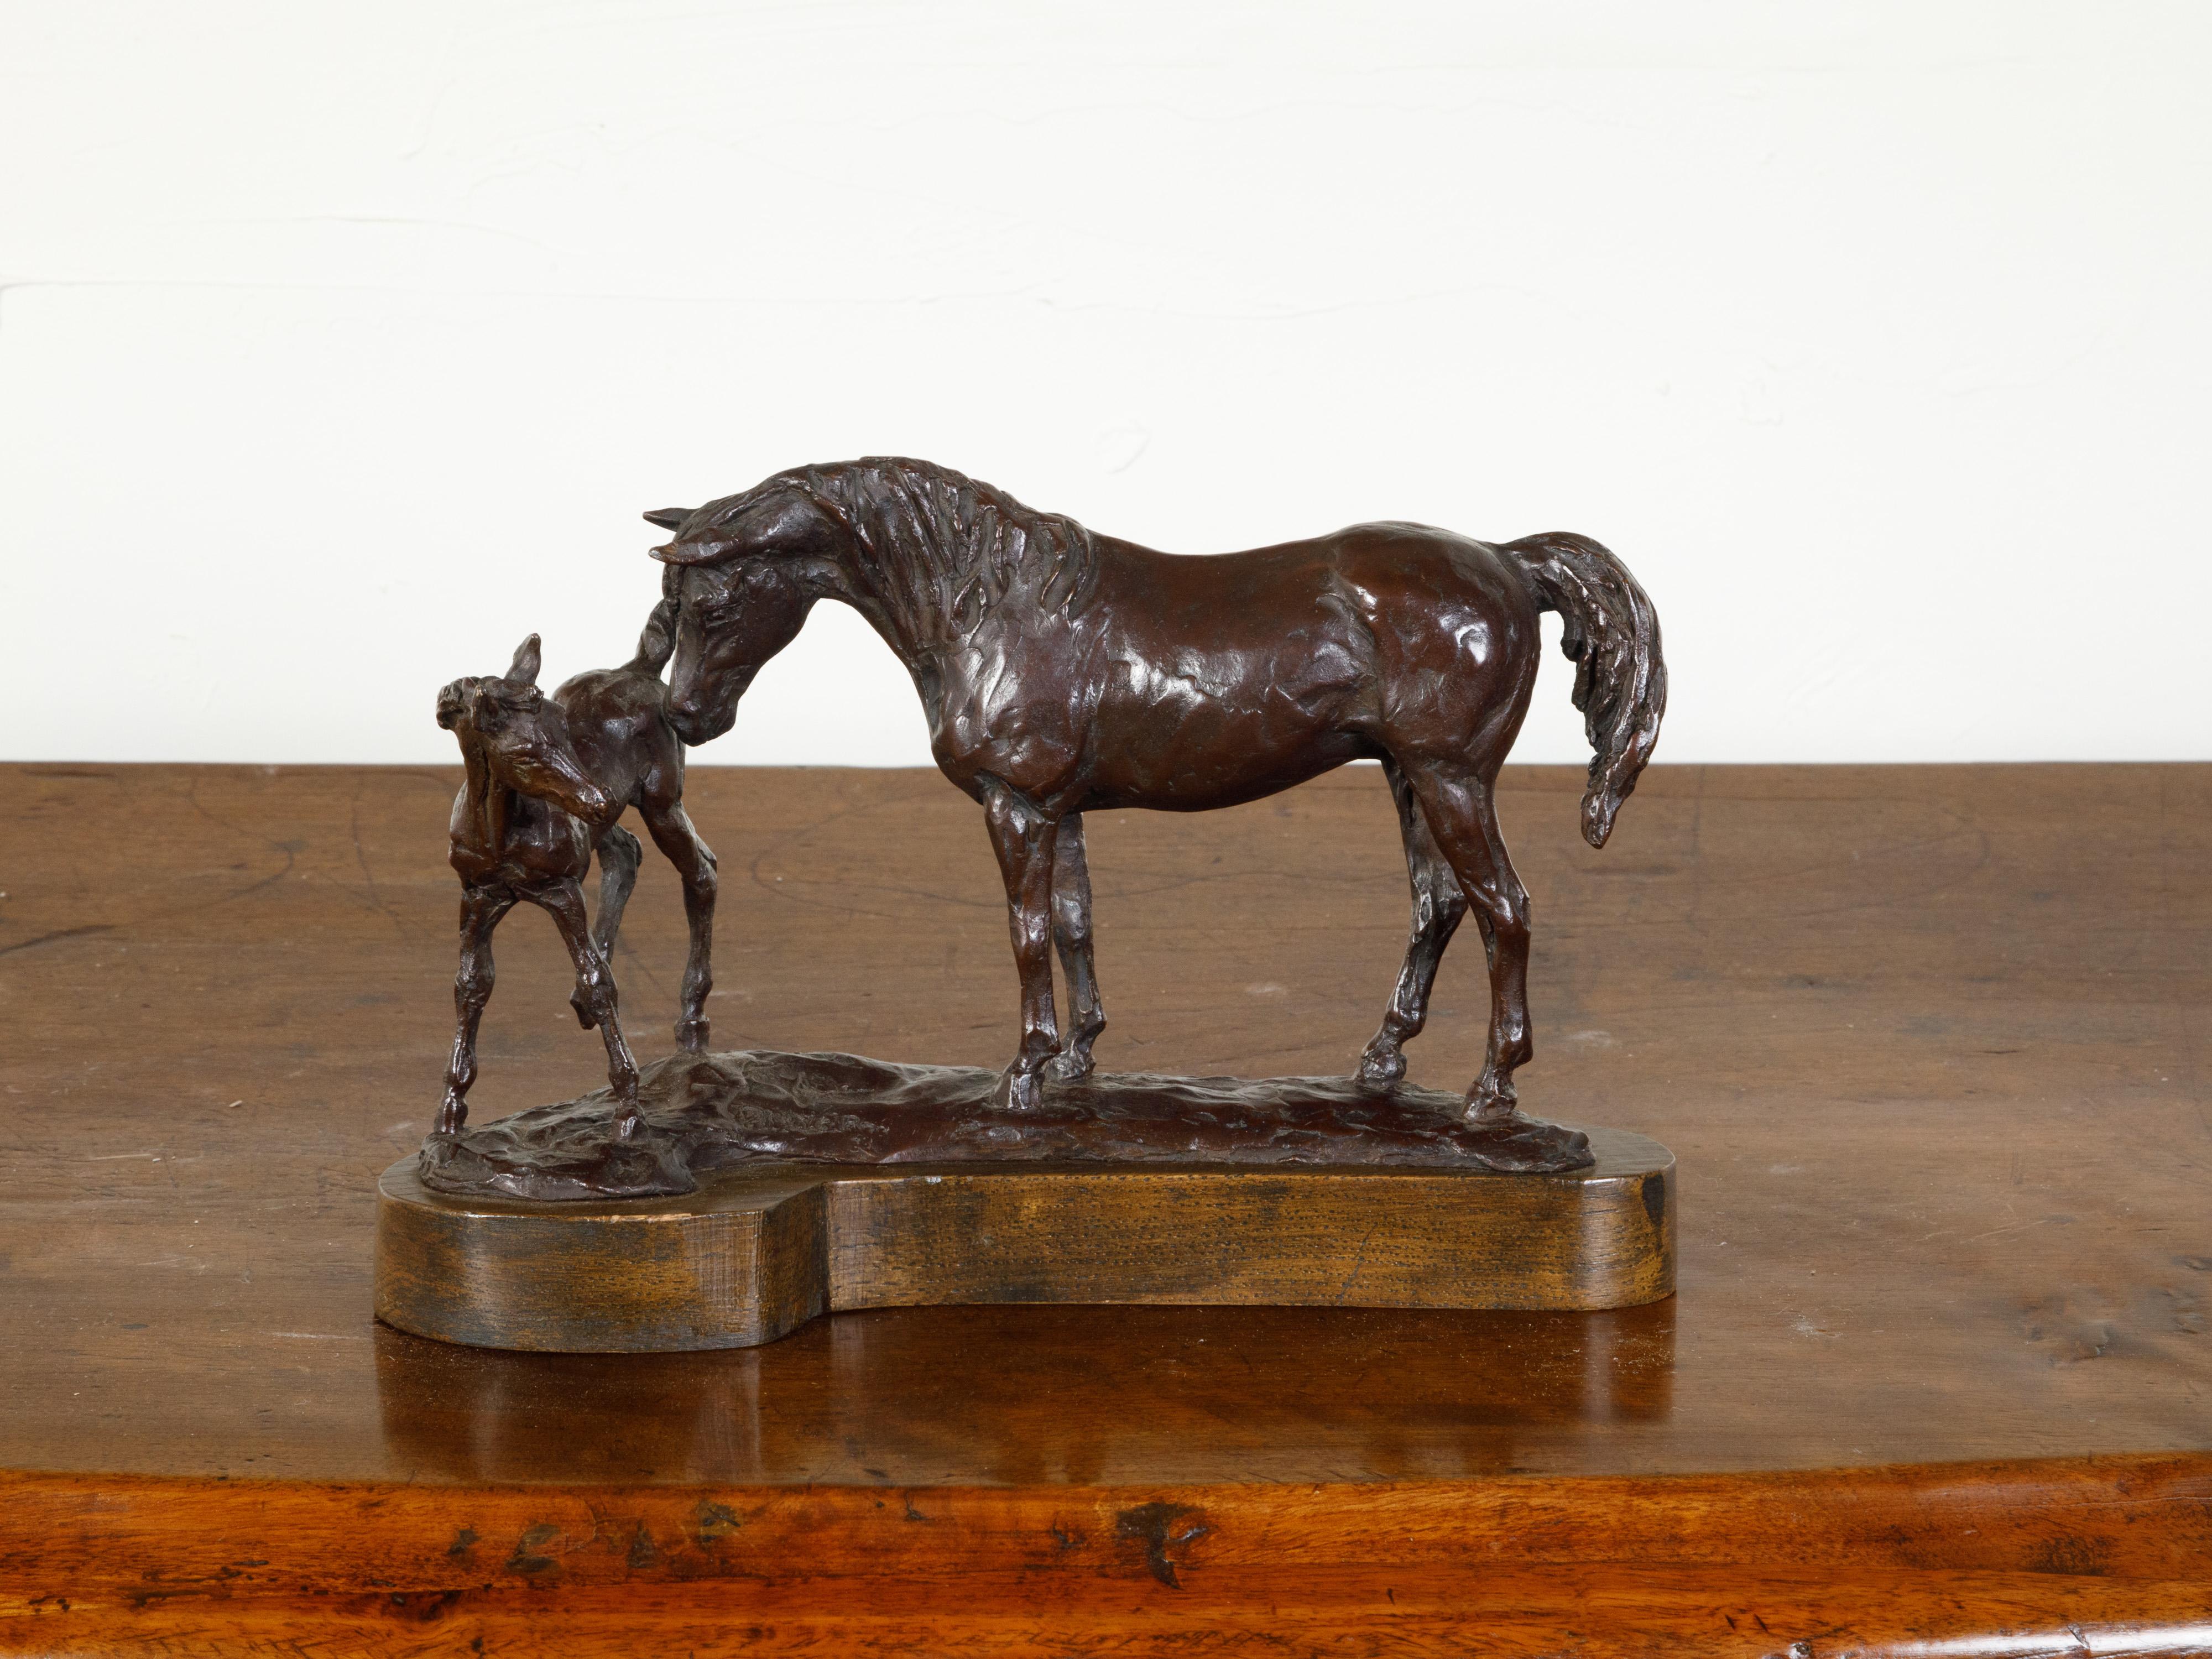 A bronze sculpted group from the mid 20th century, depicting a mare and her foal. Cast in bronze during the Midcentury period, this sculpted group depicts a mare tenderly bending her head down to touch her foal. Lifting his hind legs up, the baby